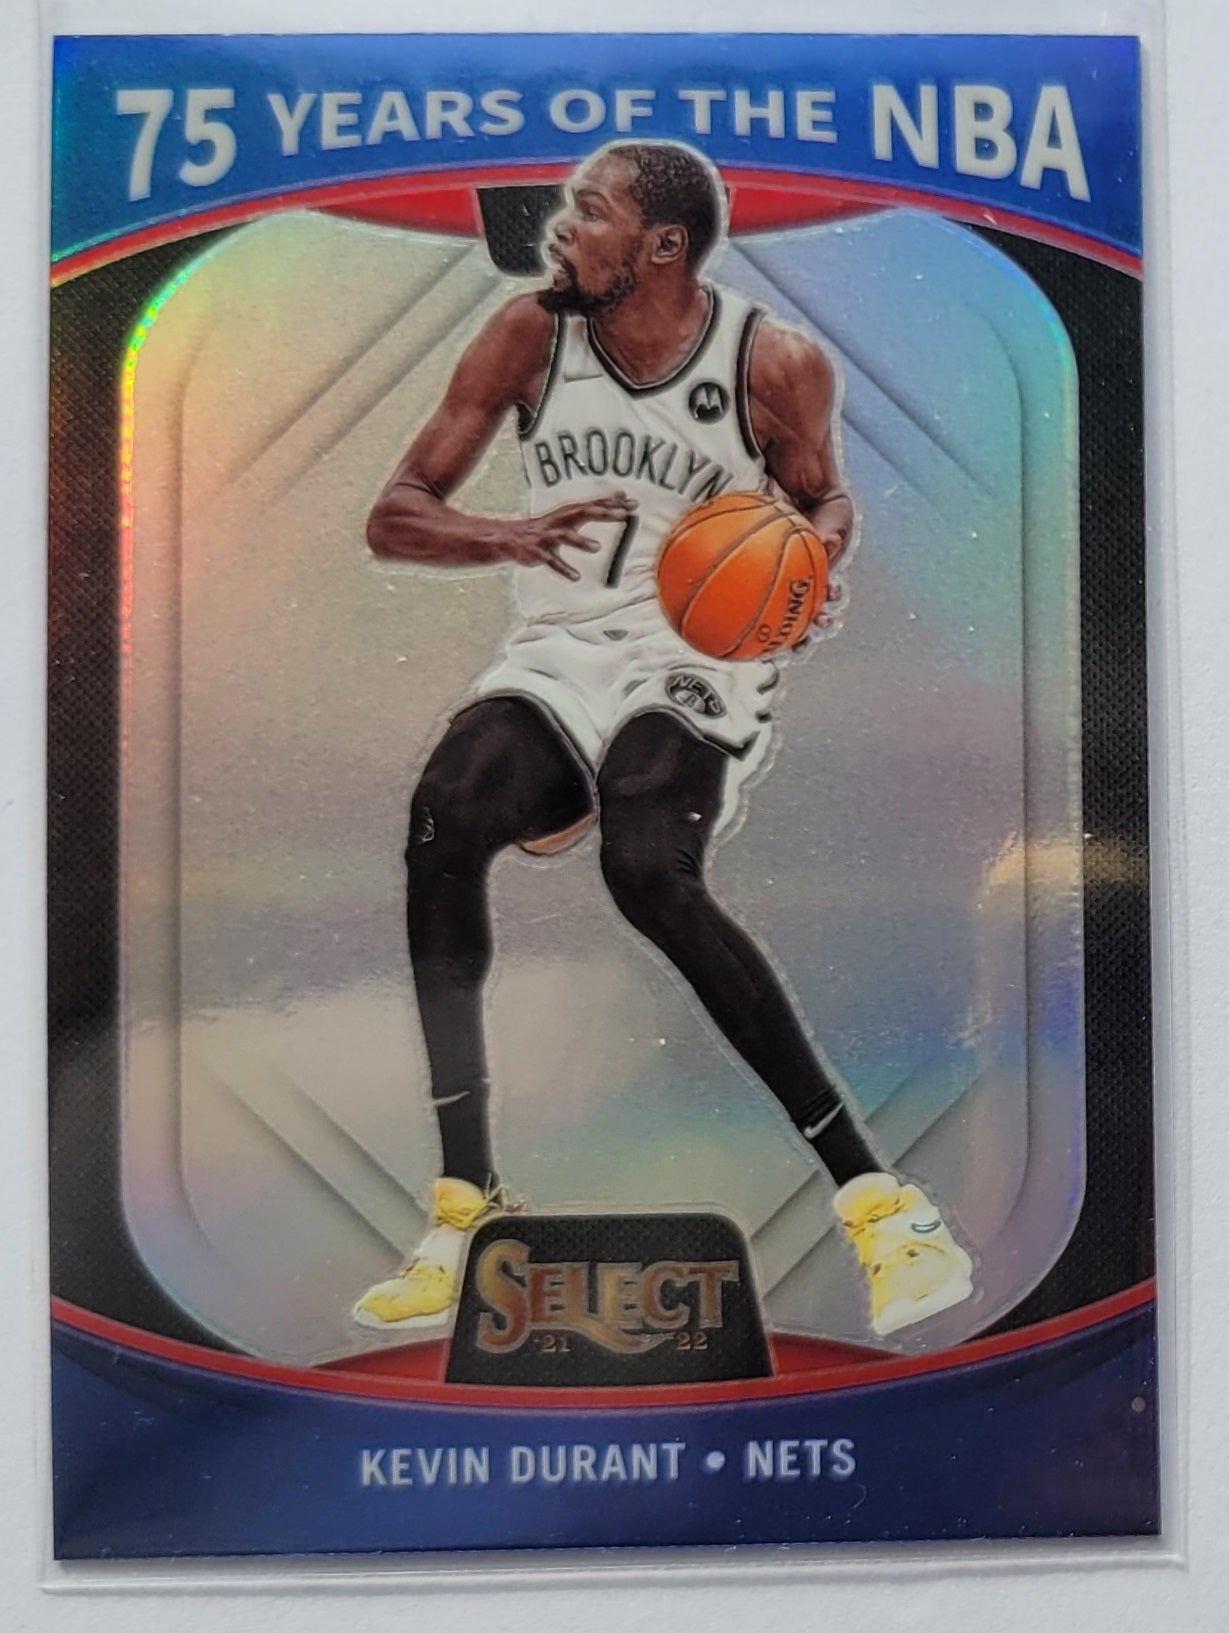 Kevin Durant - 2021-22 Panini 75 Years of the NBA Prizms Silver #52 Select